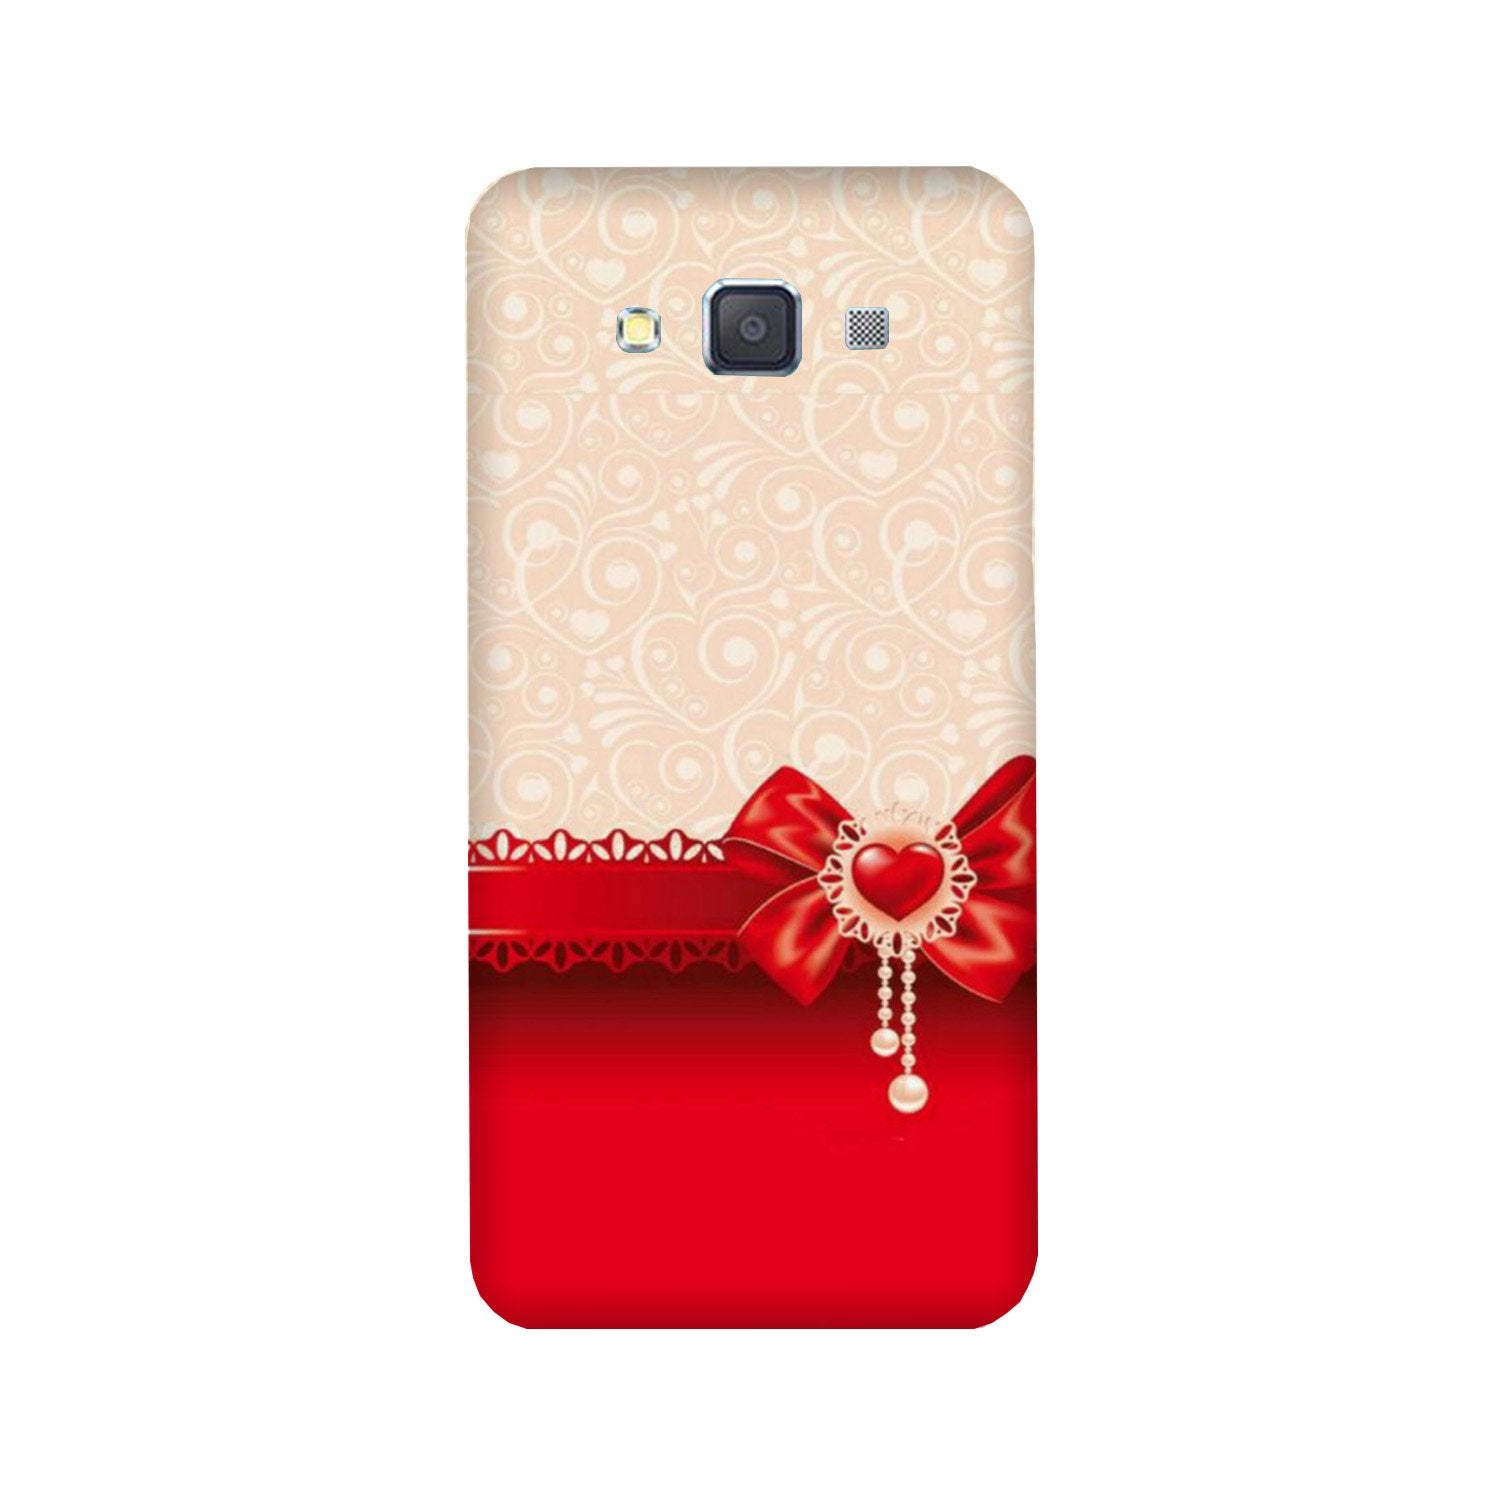 Gift Wrap3 Case for Galaxy J7 (2016)